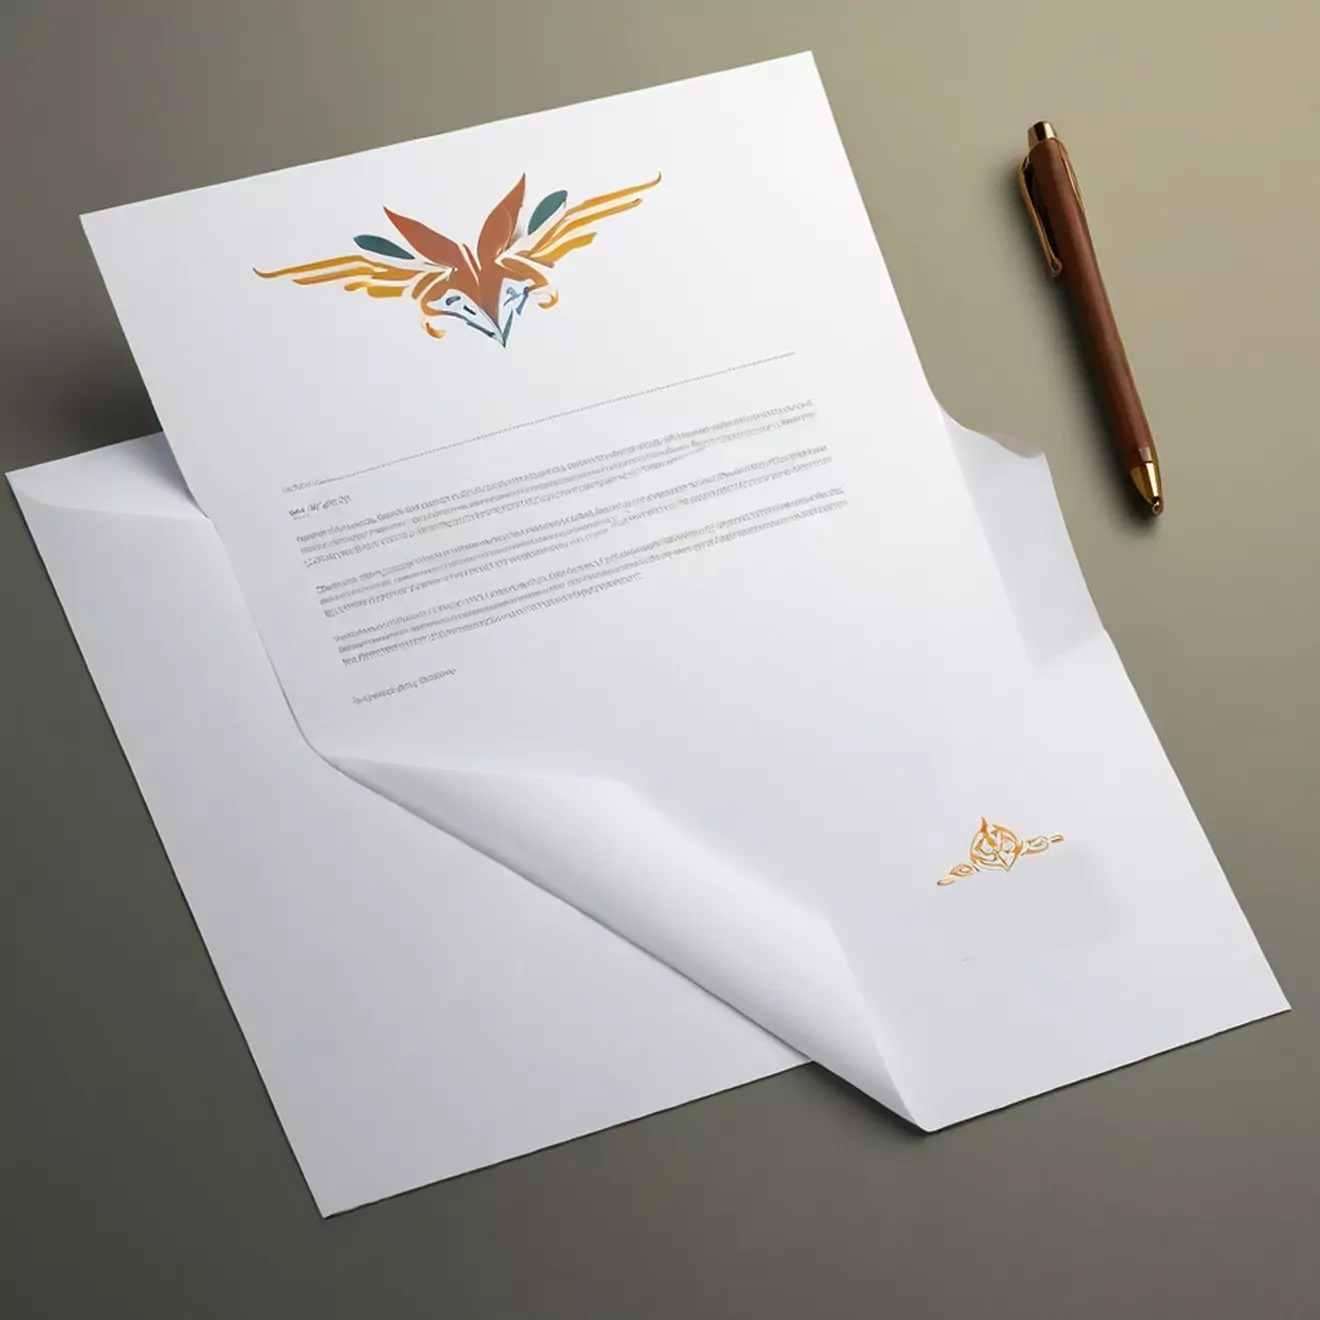 Print your own business letterheads online with RapidStudio